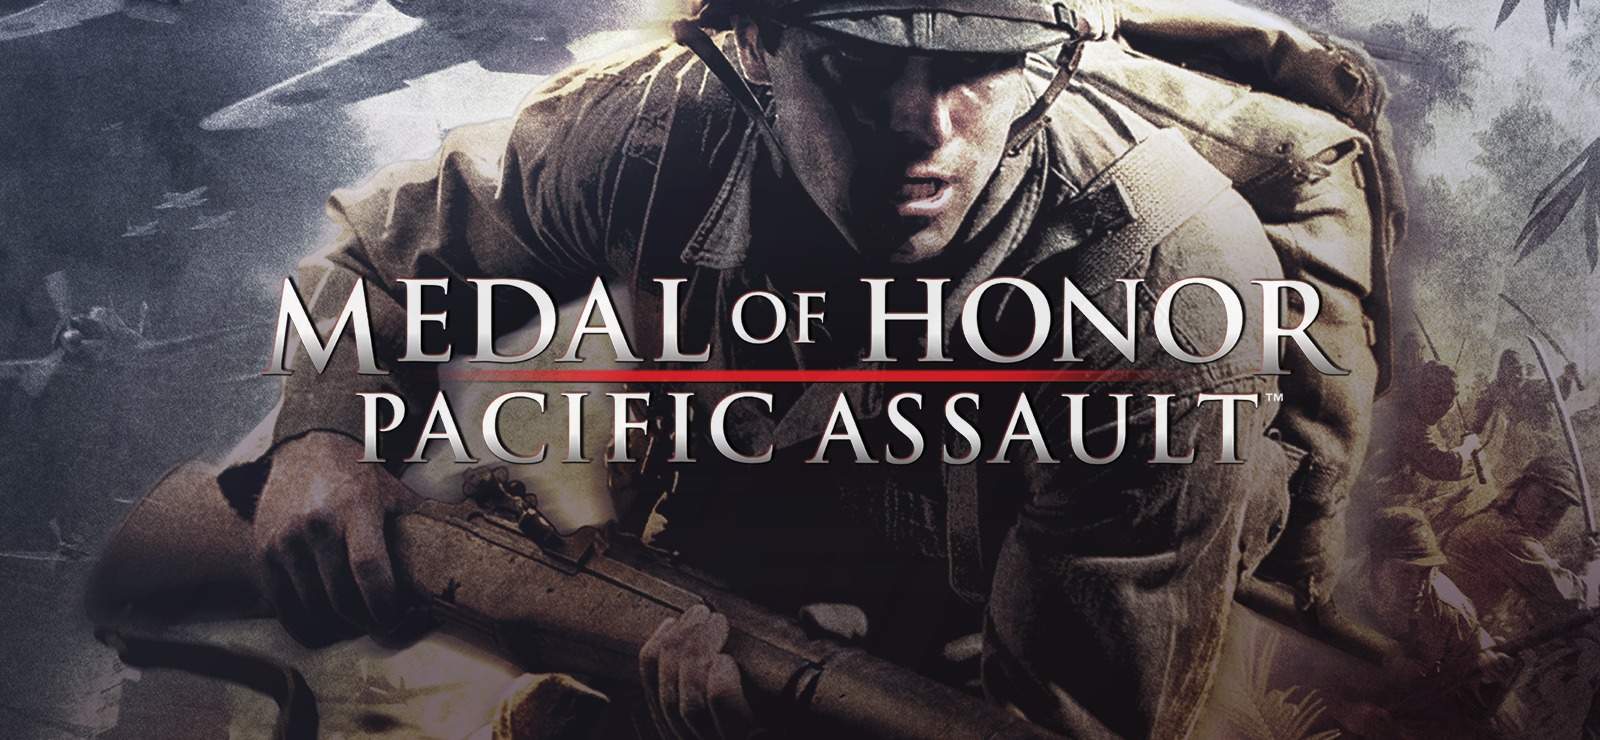 Medal of Honor™ Pacific Assault